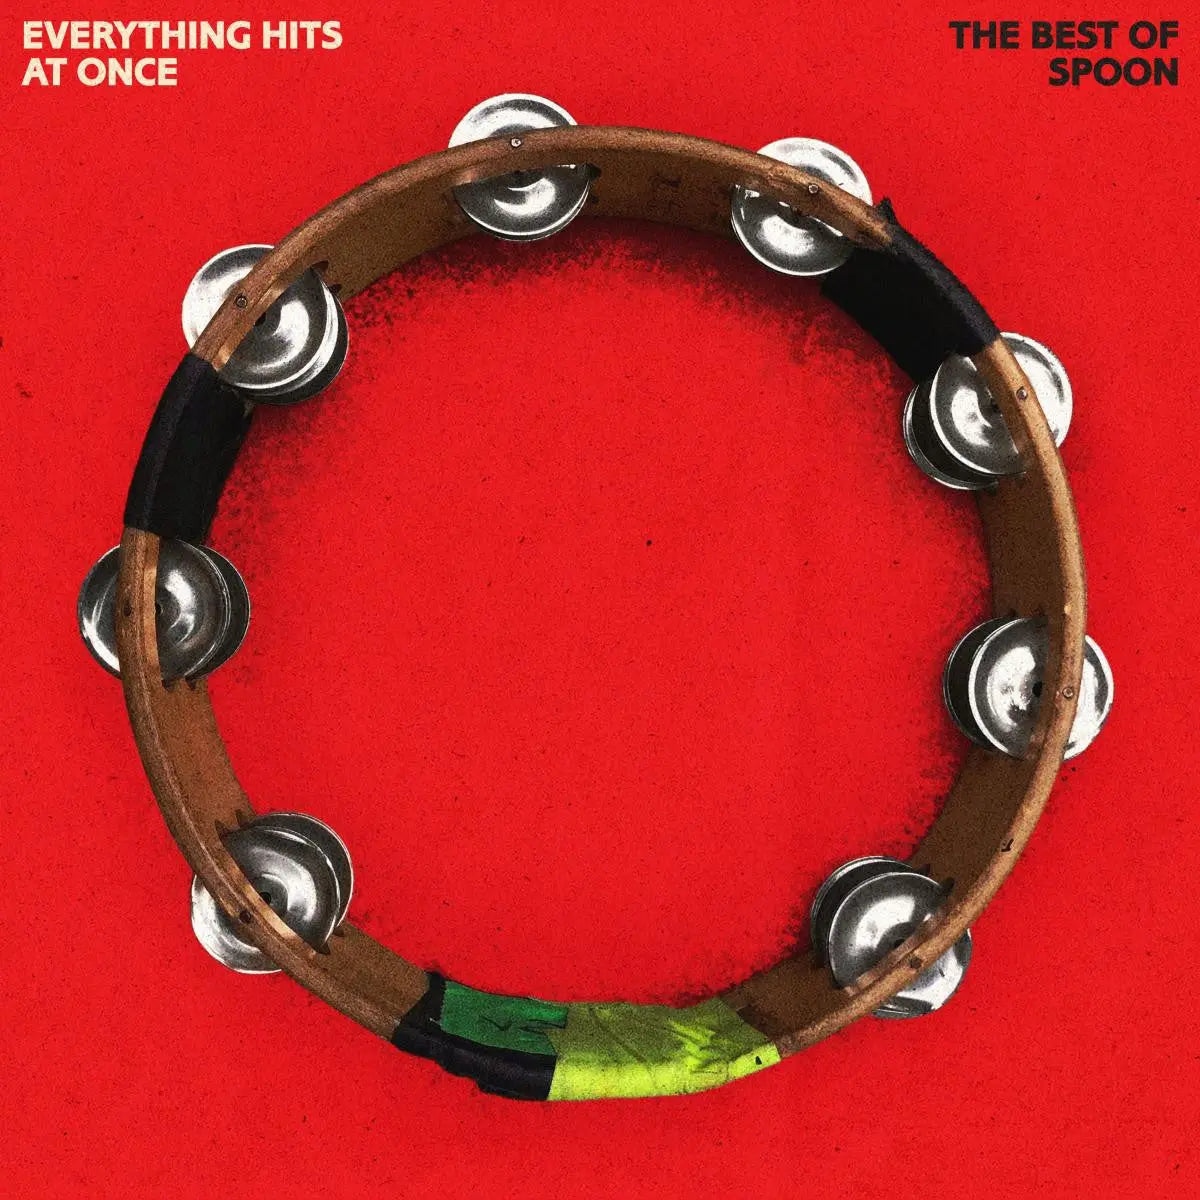 Spoon - Everything Hits At Once: The Best Of Spoon [Vinyl]